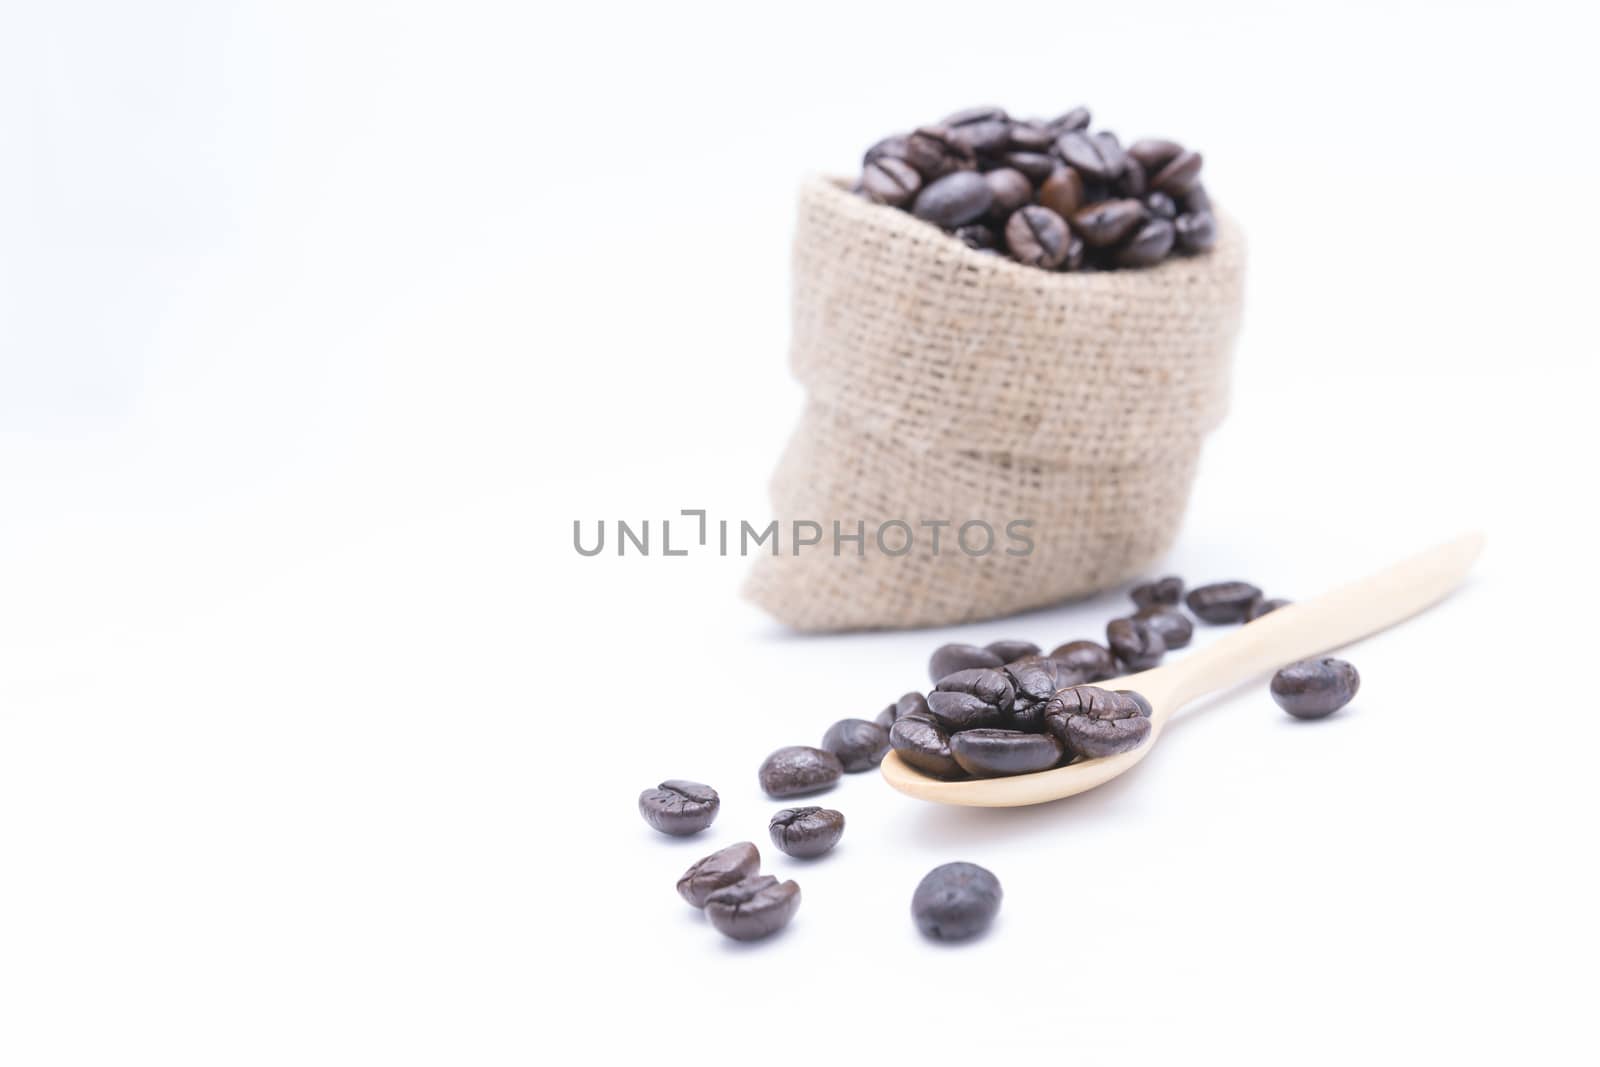 Coffee beans in a wooden scoop and spilling out from a hessian bag, over white background.